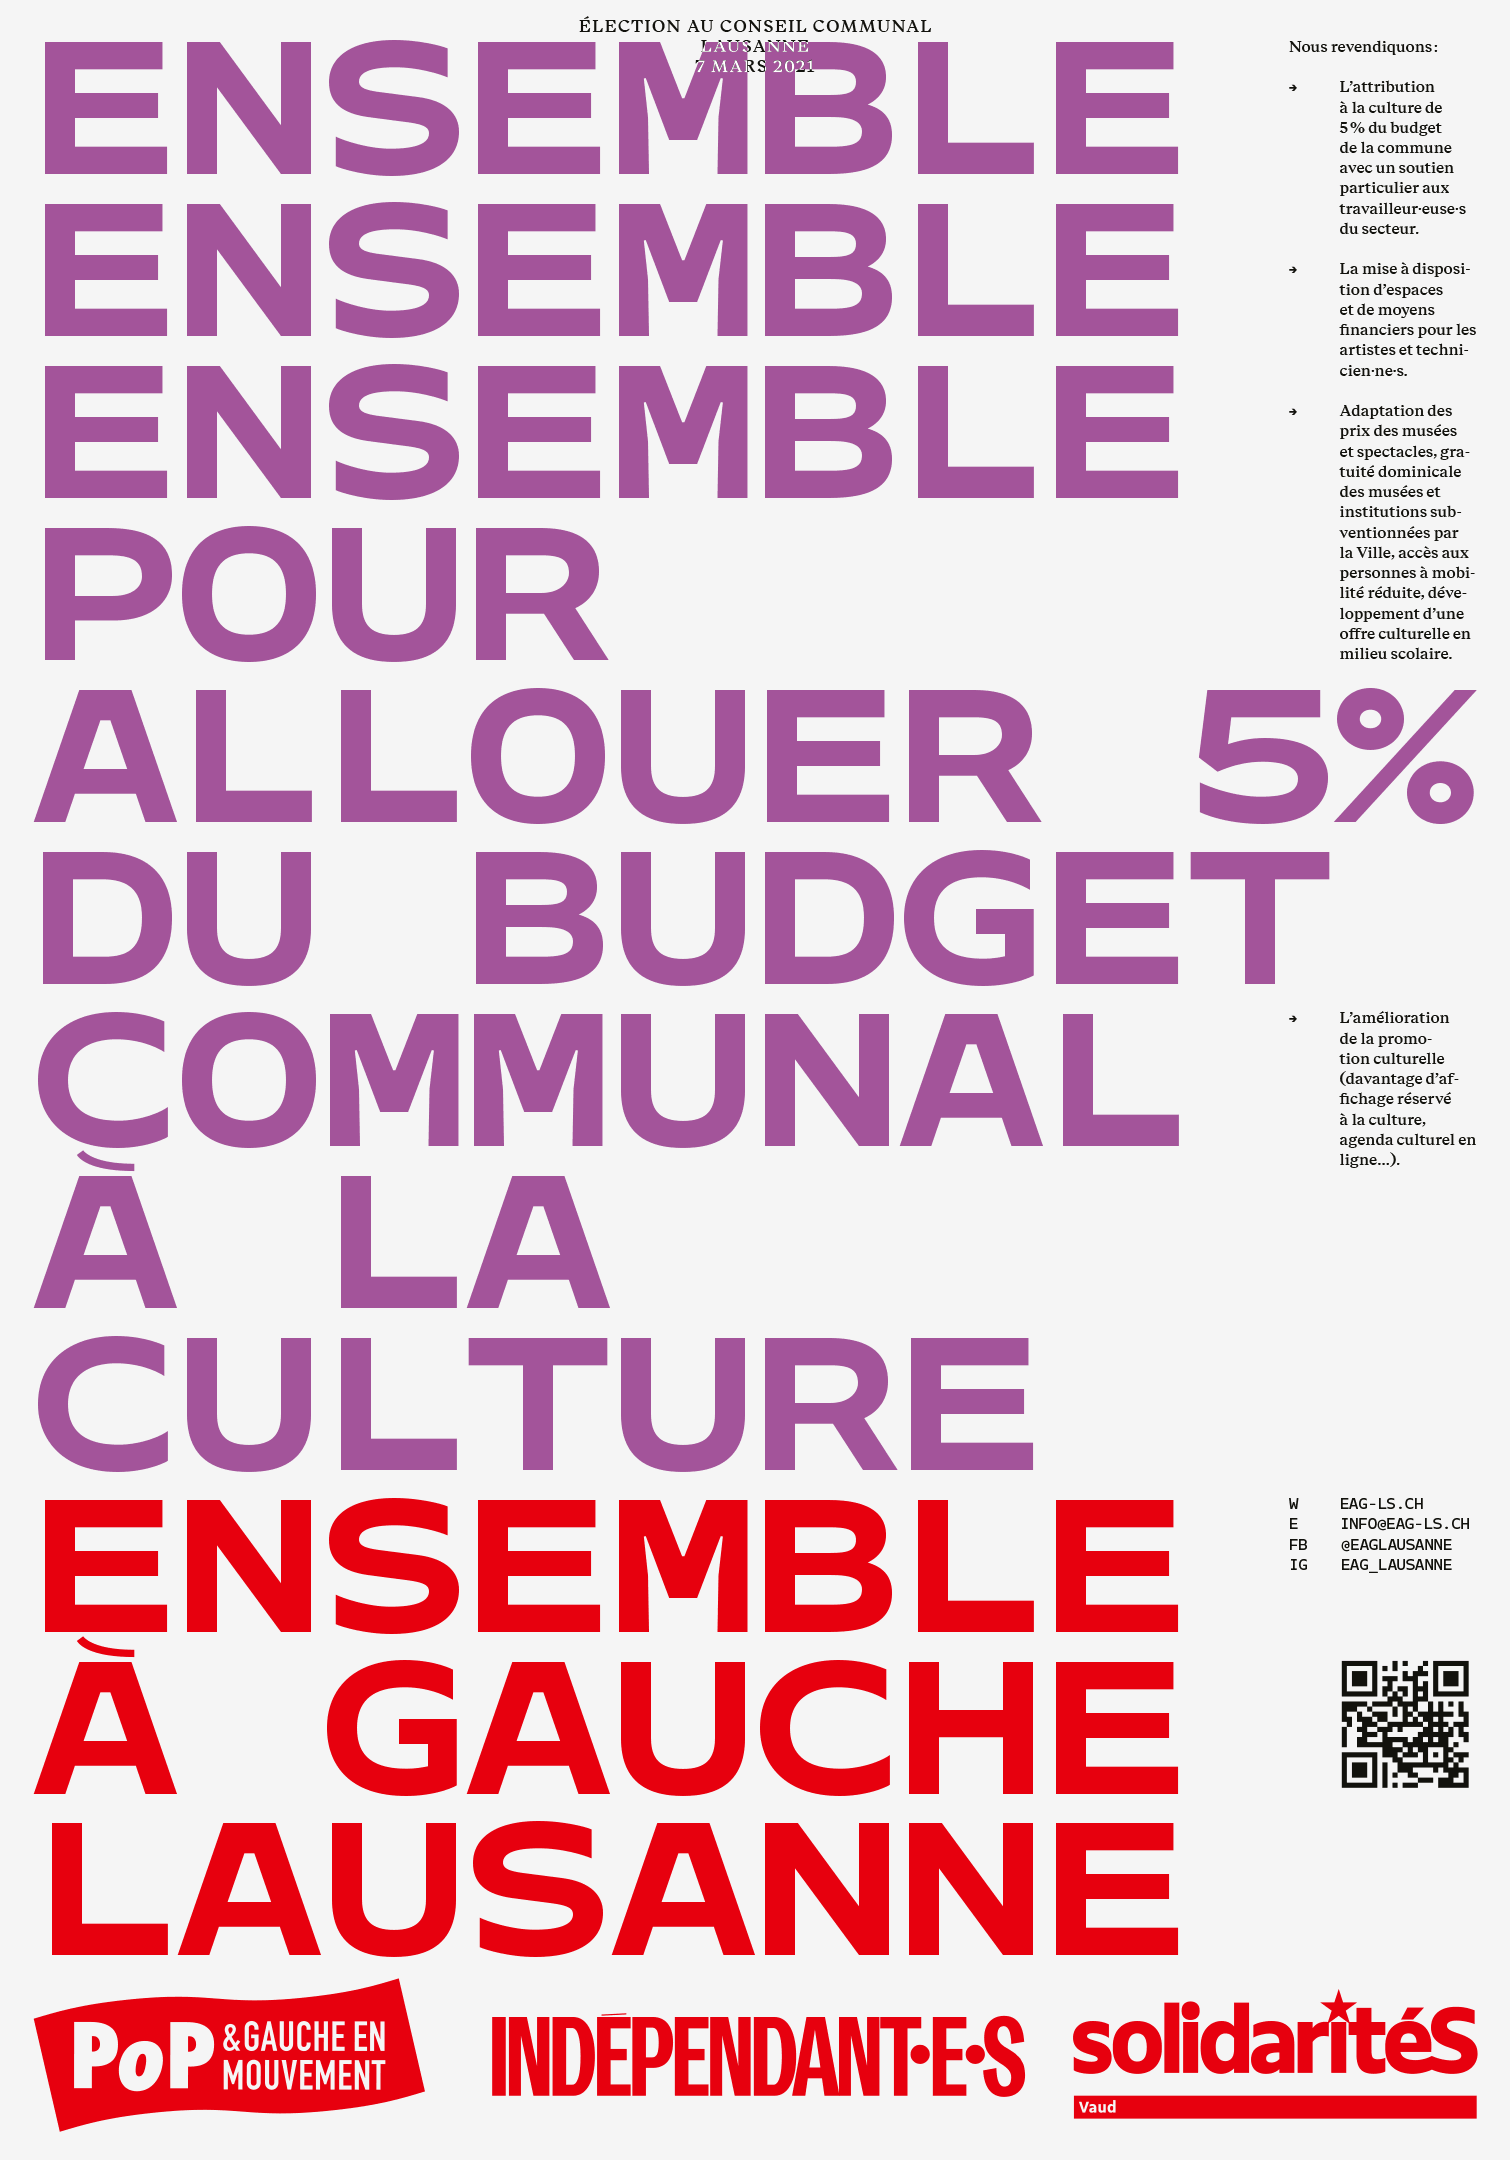 Poster for the communal elections 2021 in Lausanne